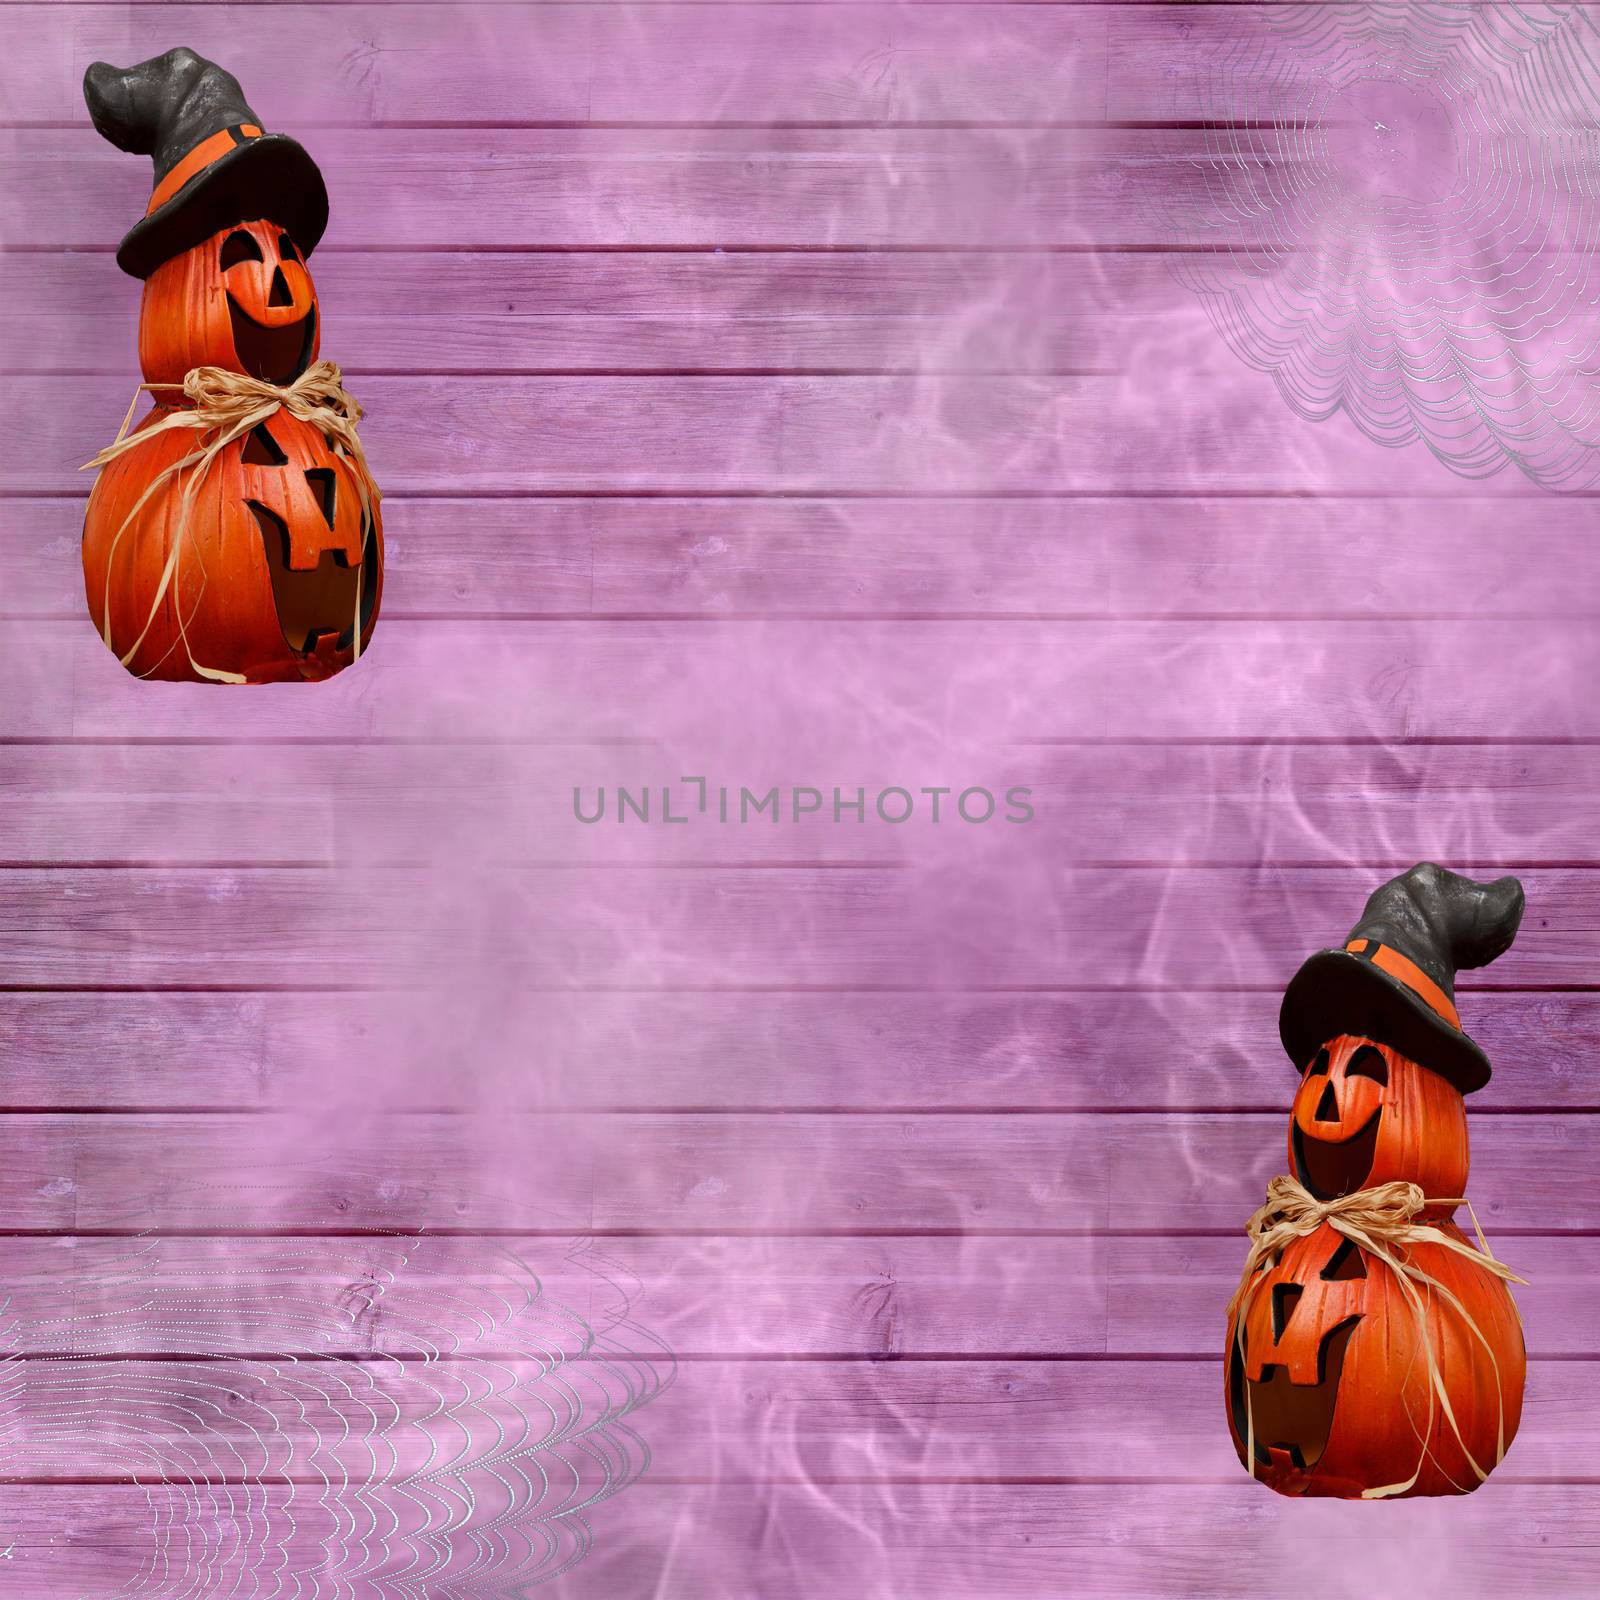 Halloween festival celebration background with purple wooden planks spider webs and carved pumpkins wearing a witch hat by charlottebleijenberg